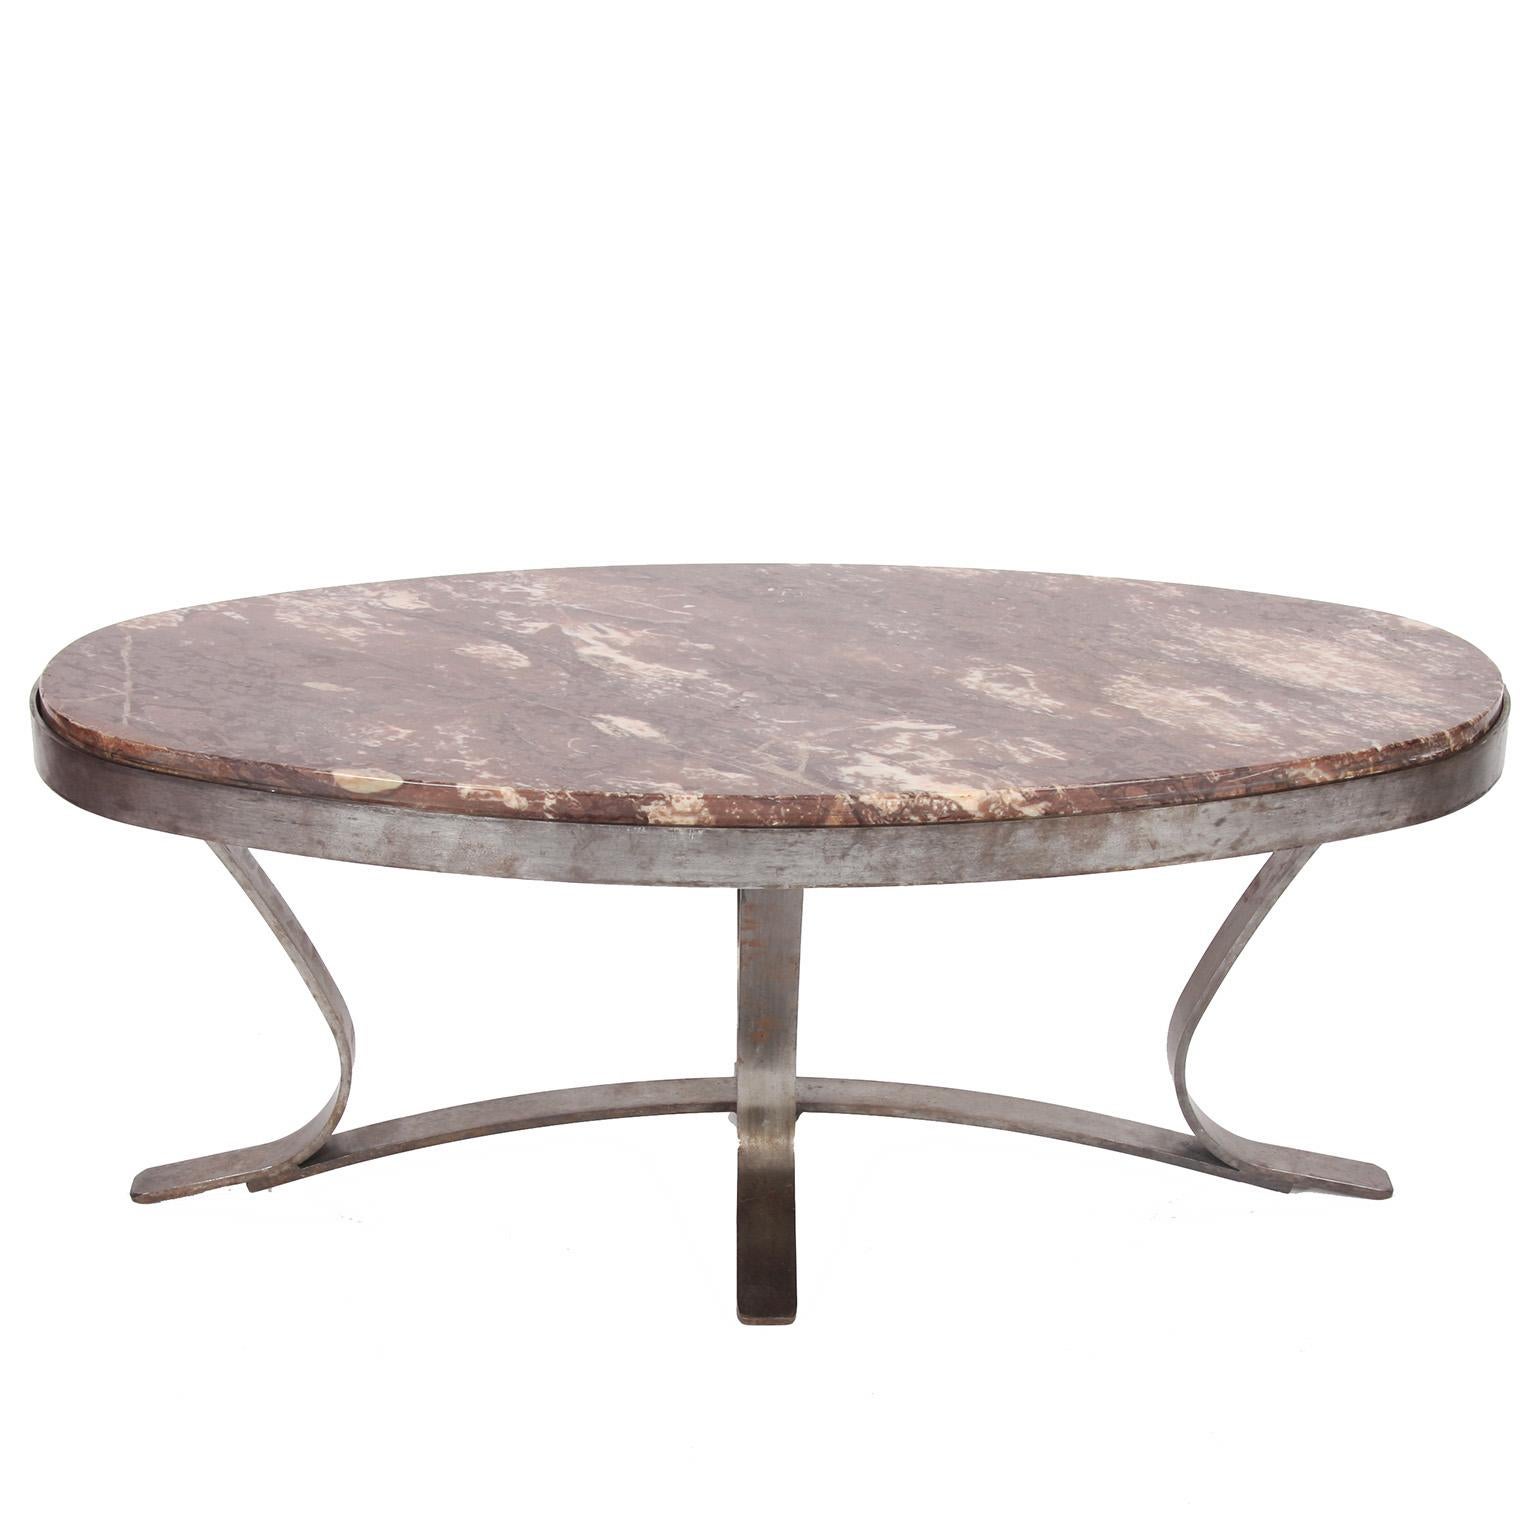 French, 1970s

An oval, marble and brushed steel, low coffee table.